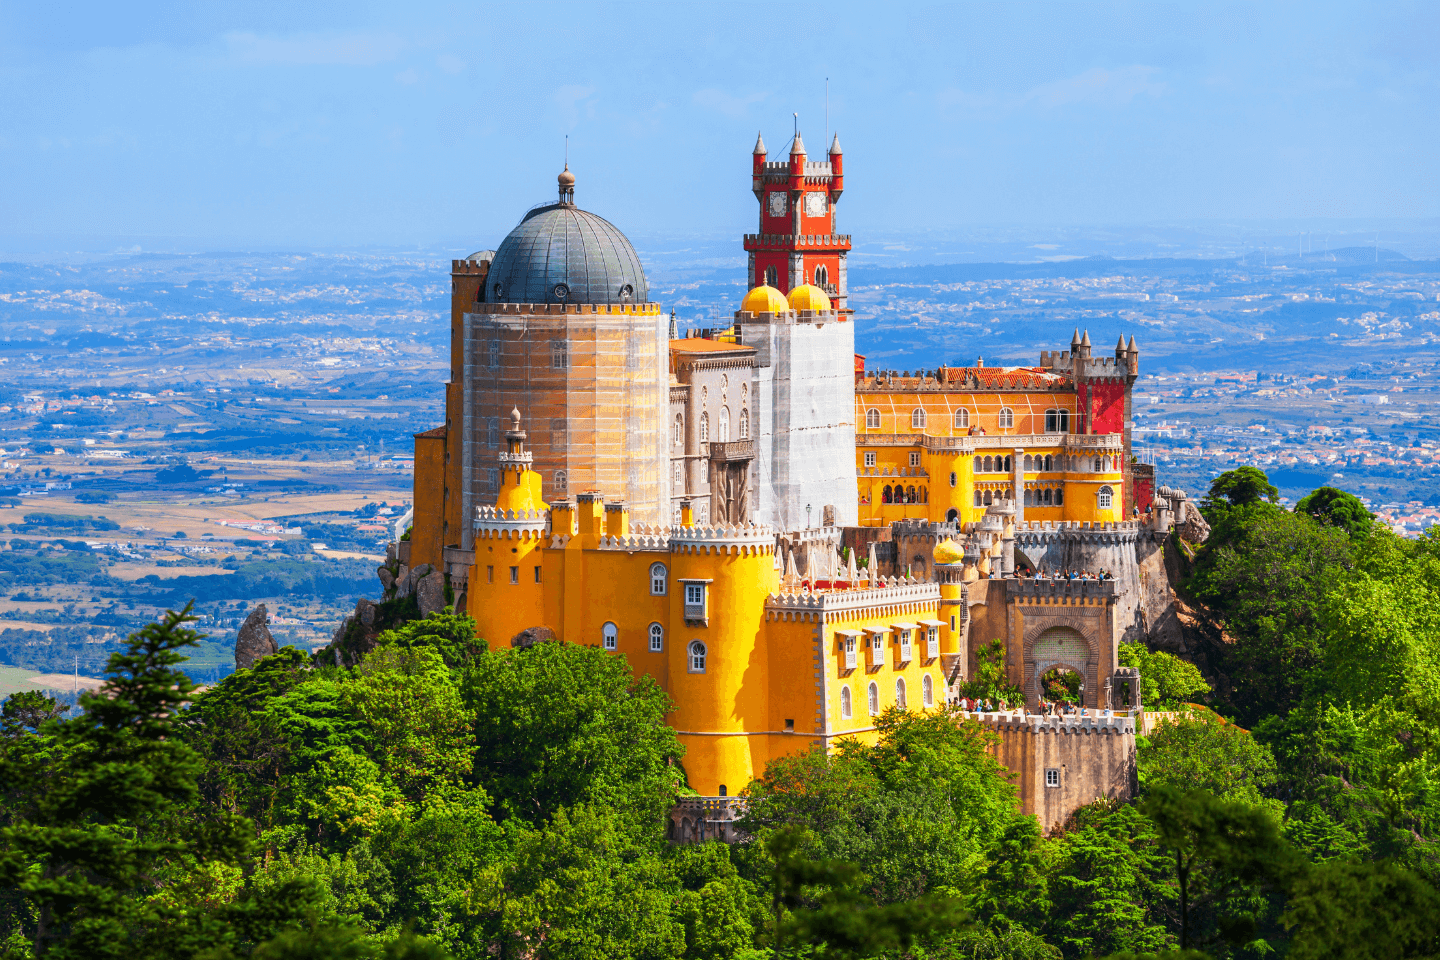 #3 Pena Palace in Sintra